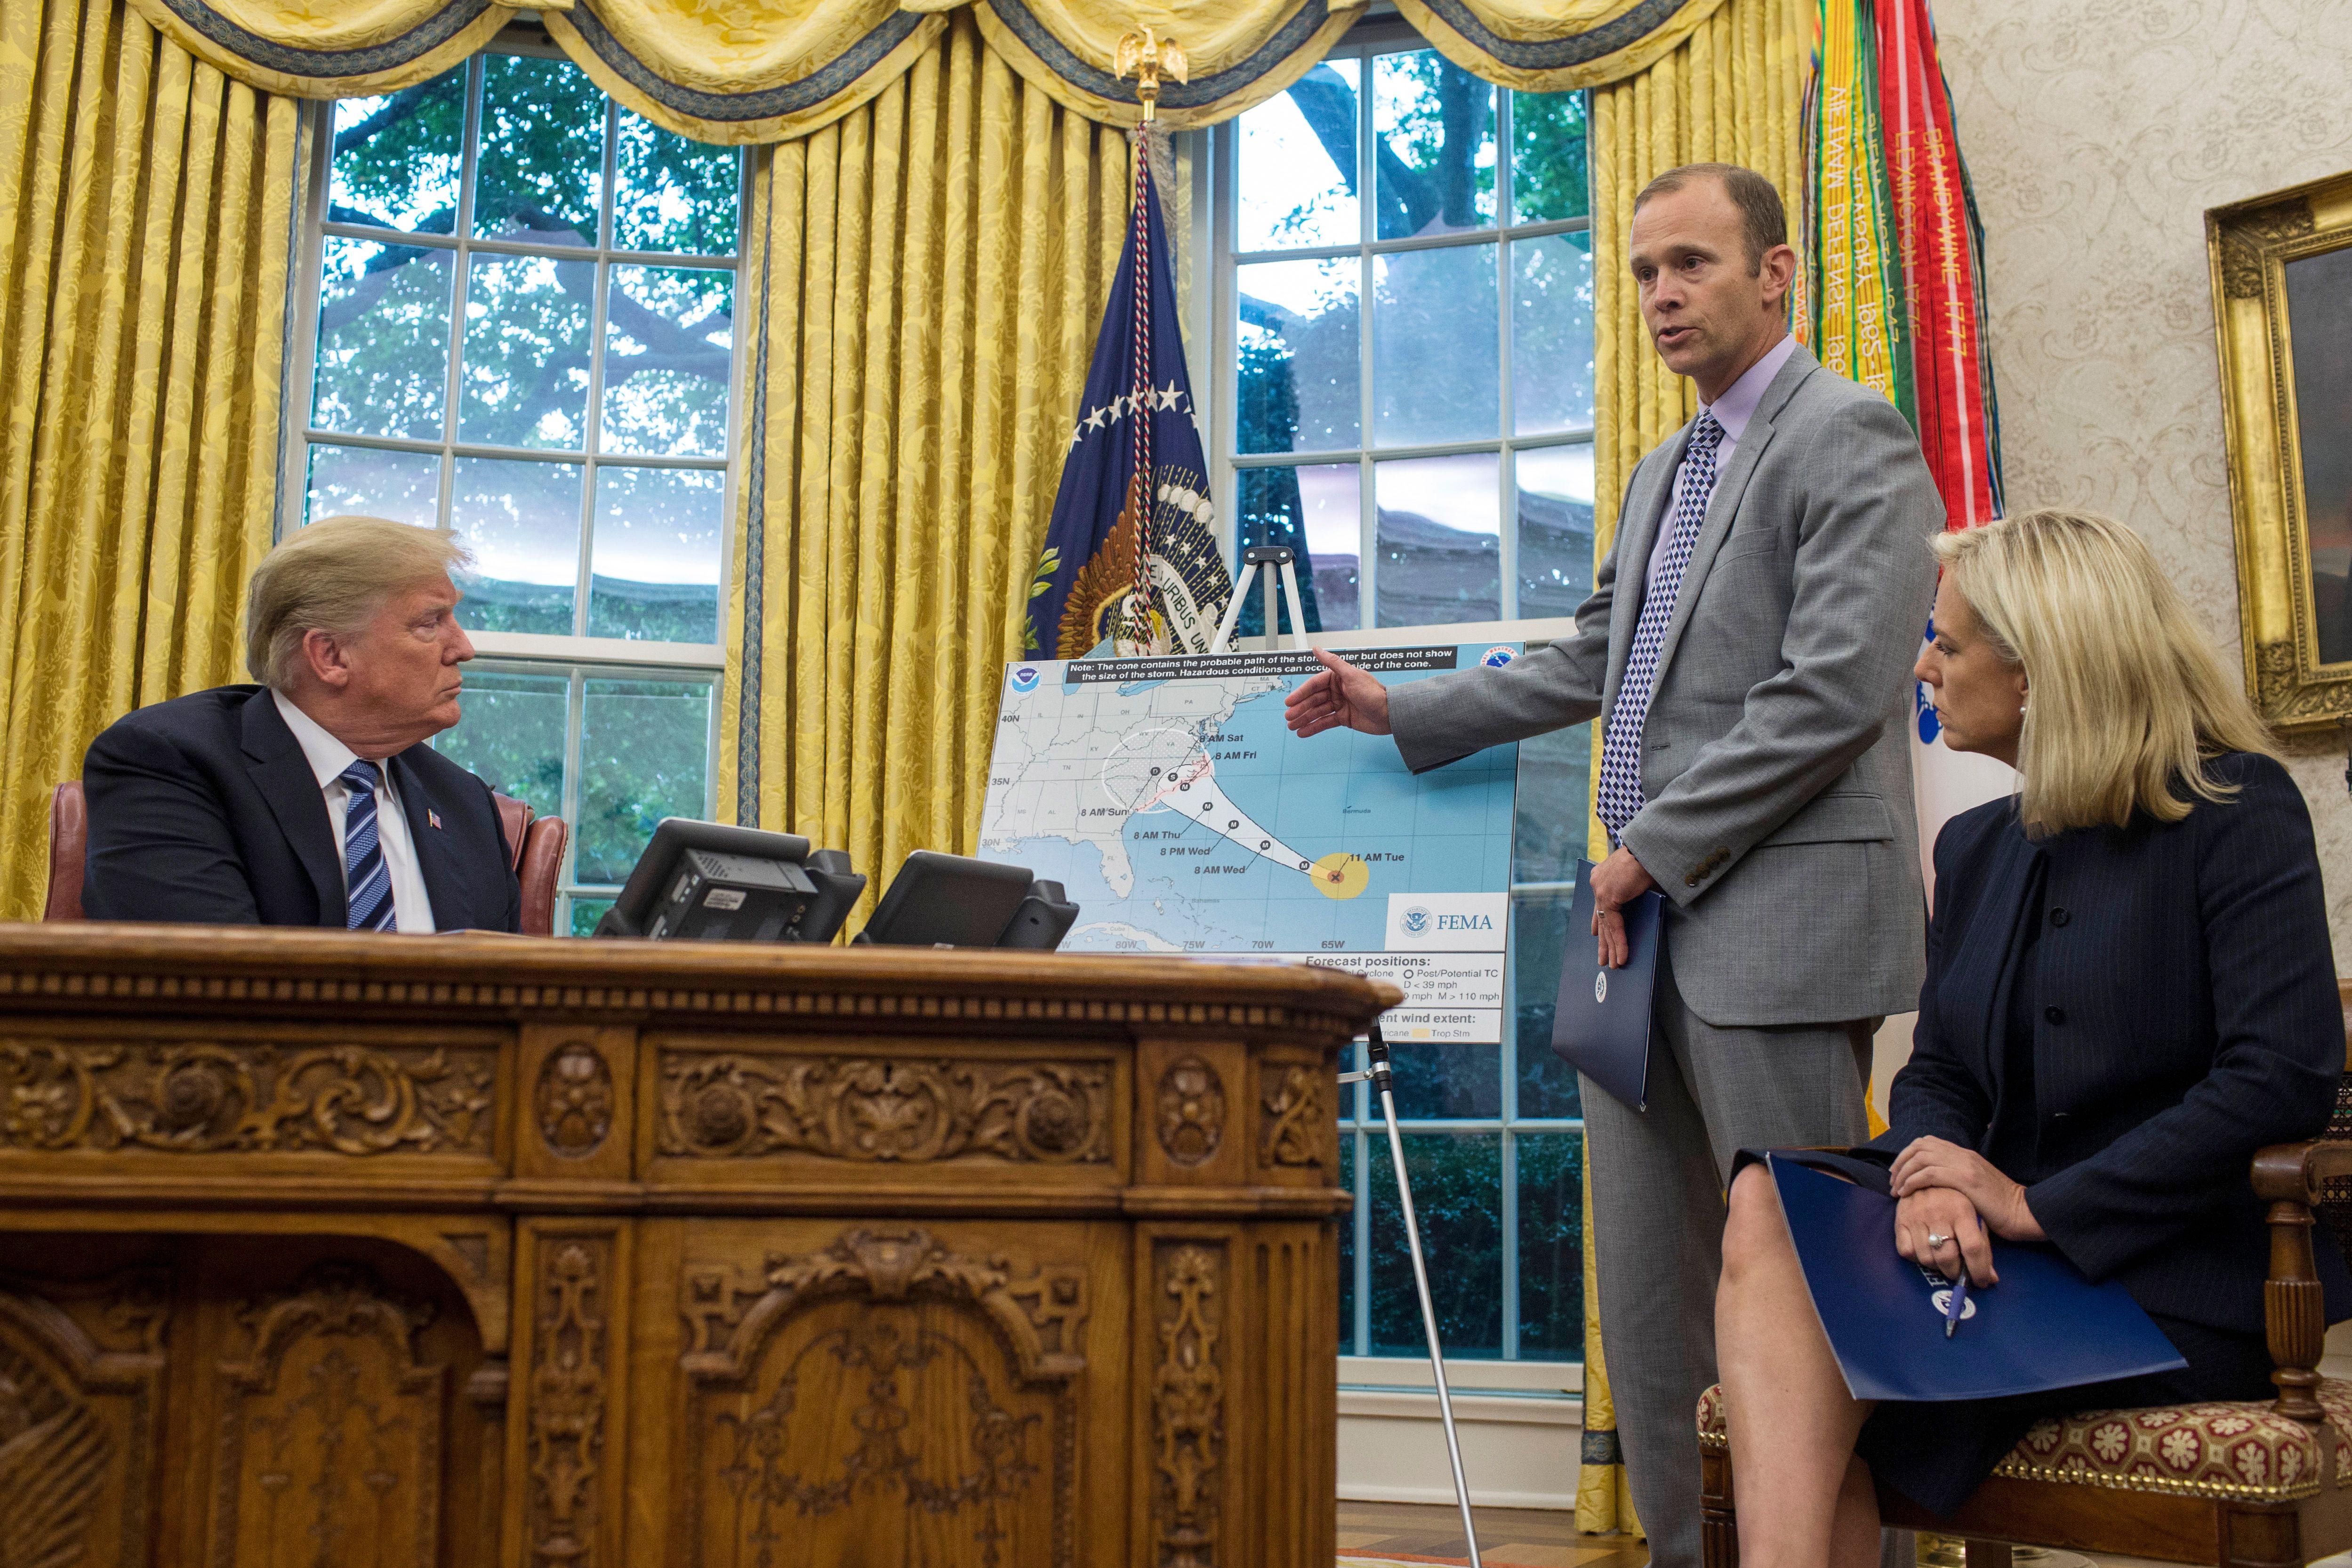 Donald Trump sits at his desk in the Oval Office while FEMA Administrator Brock Long stands and points to a map of Hurricane Florence's path, next to U.S. Secretary of Homeland Security Kirstjen Nielsen.